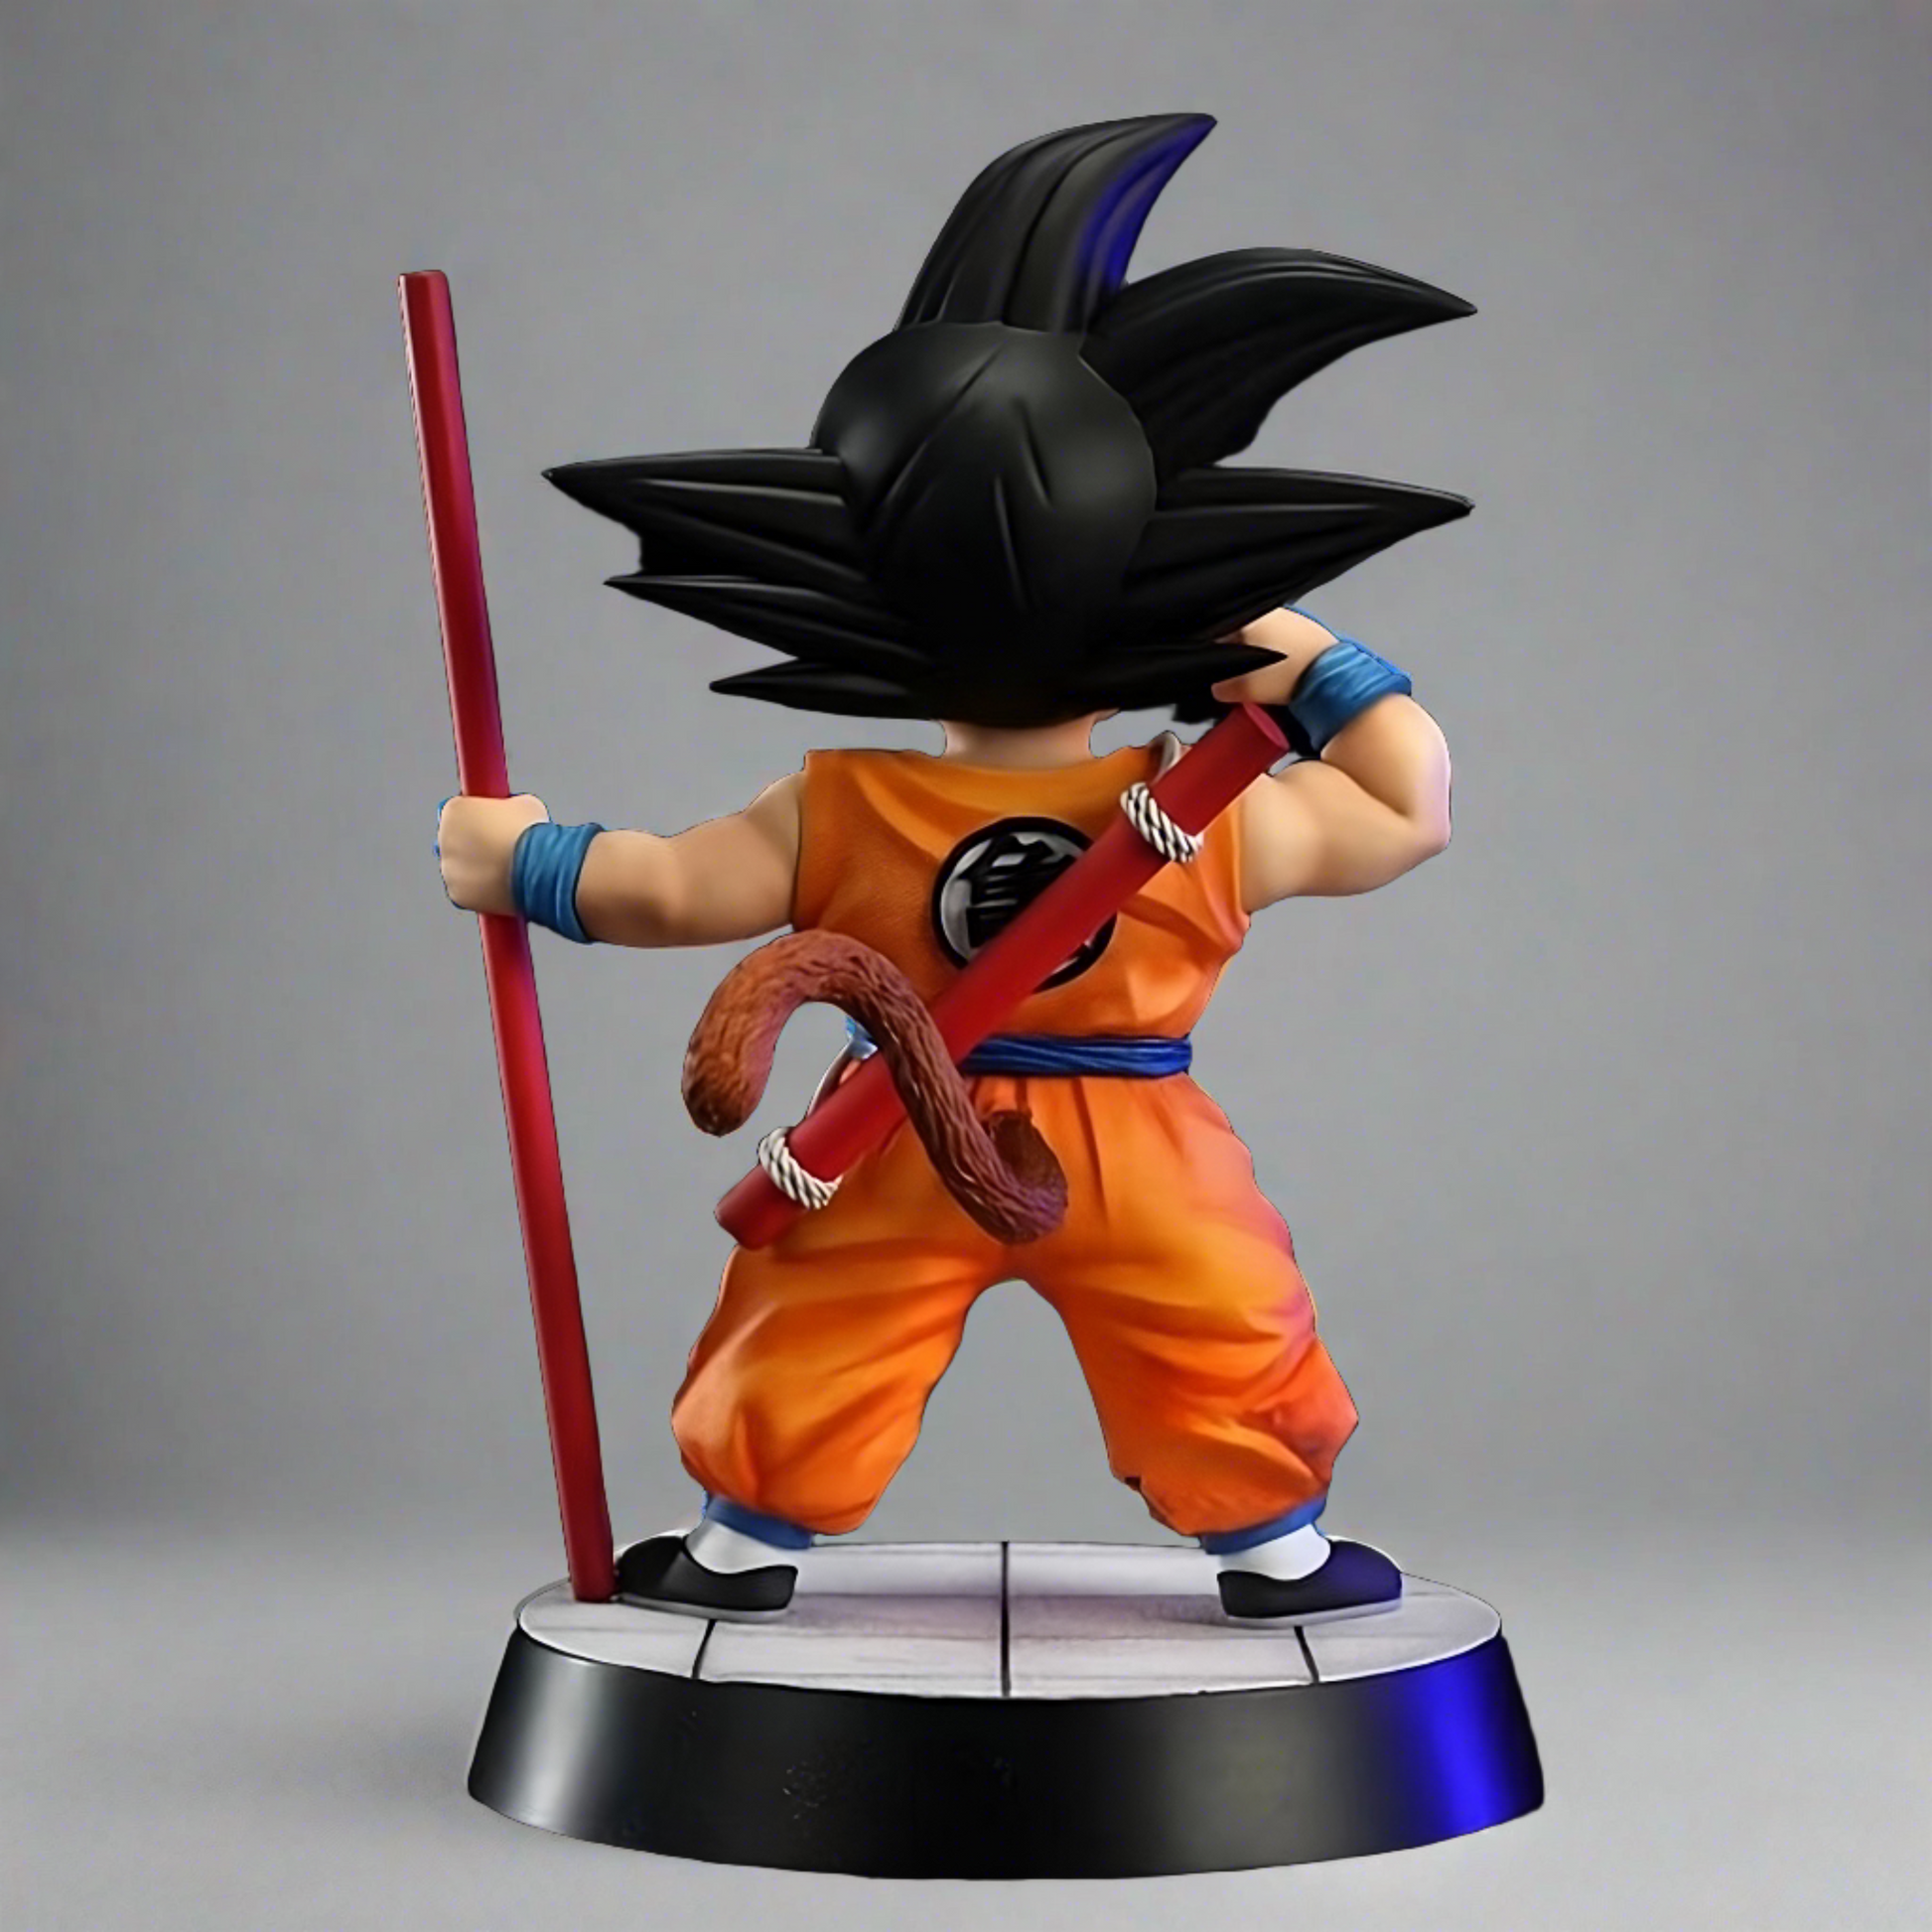 Rear angle of the young Goku collectible figure from Dragon Ball, showcasing his iconic tail and Power Pole, poised for action on a display base.